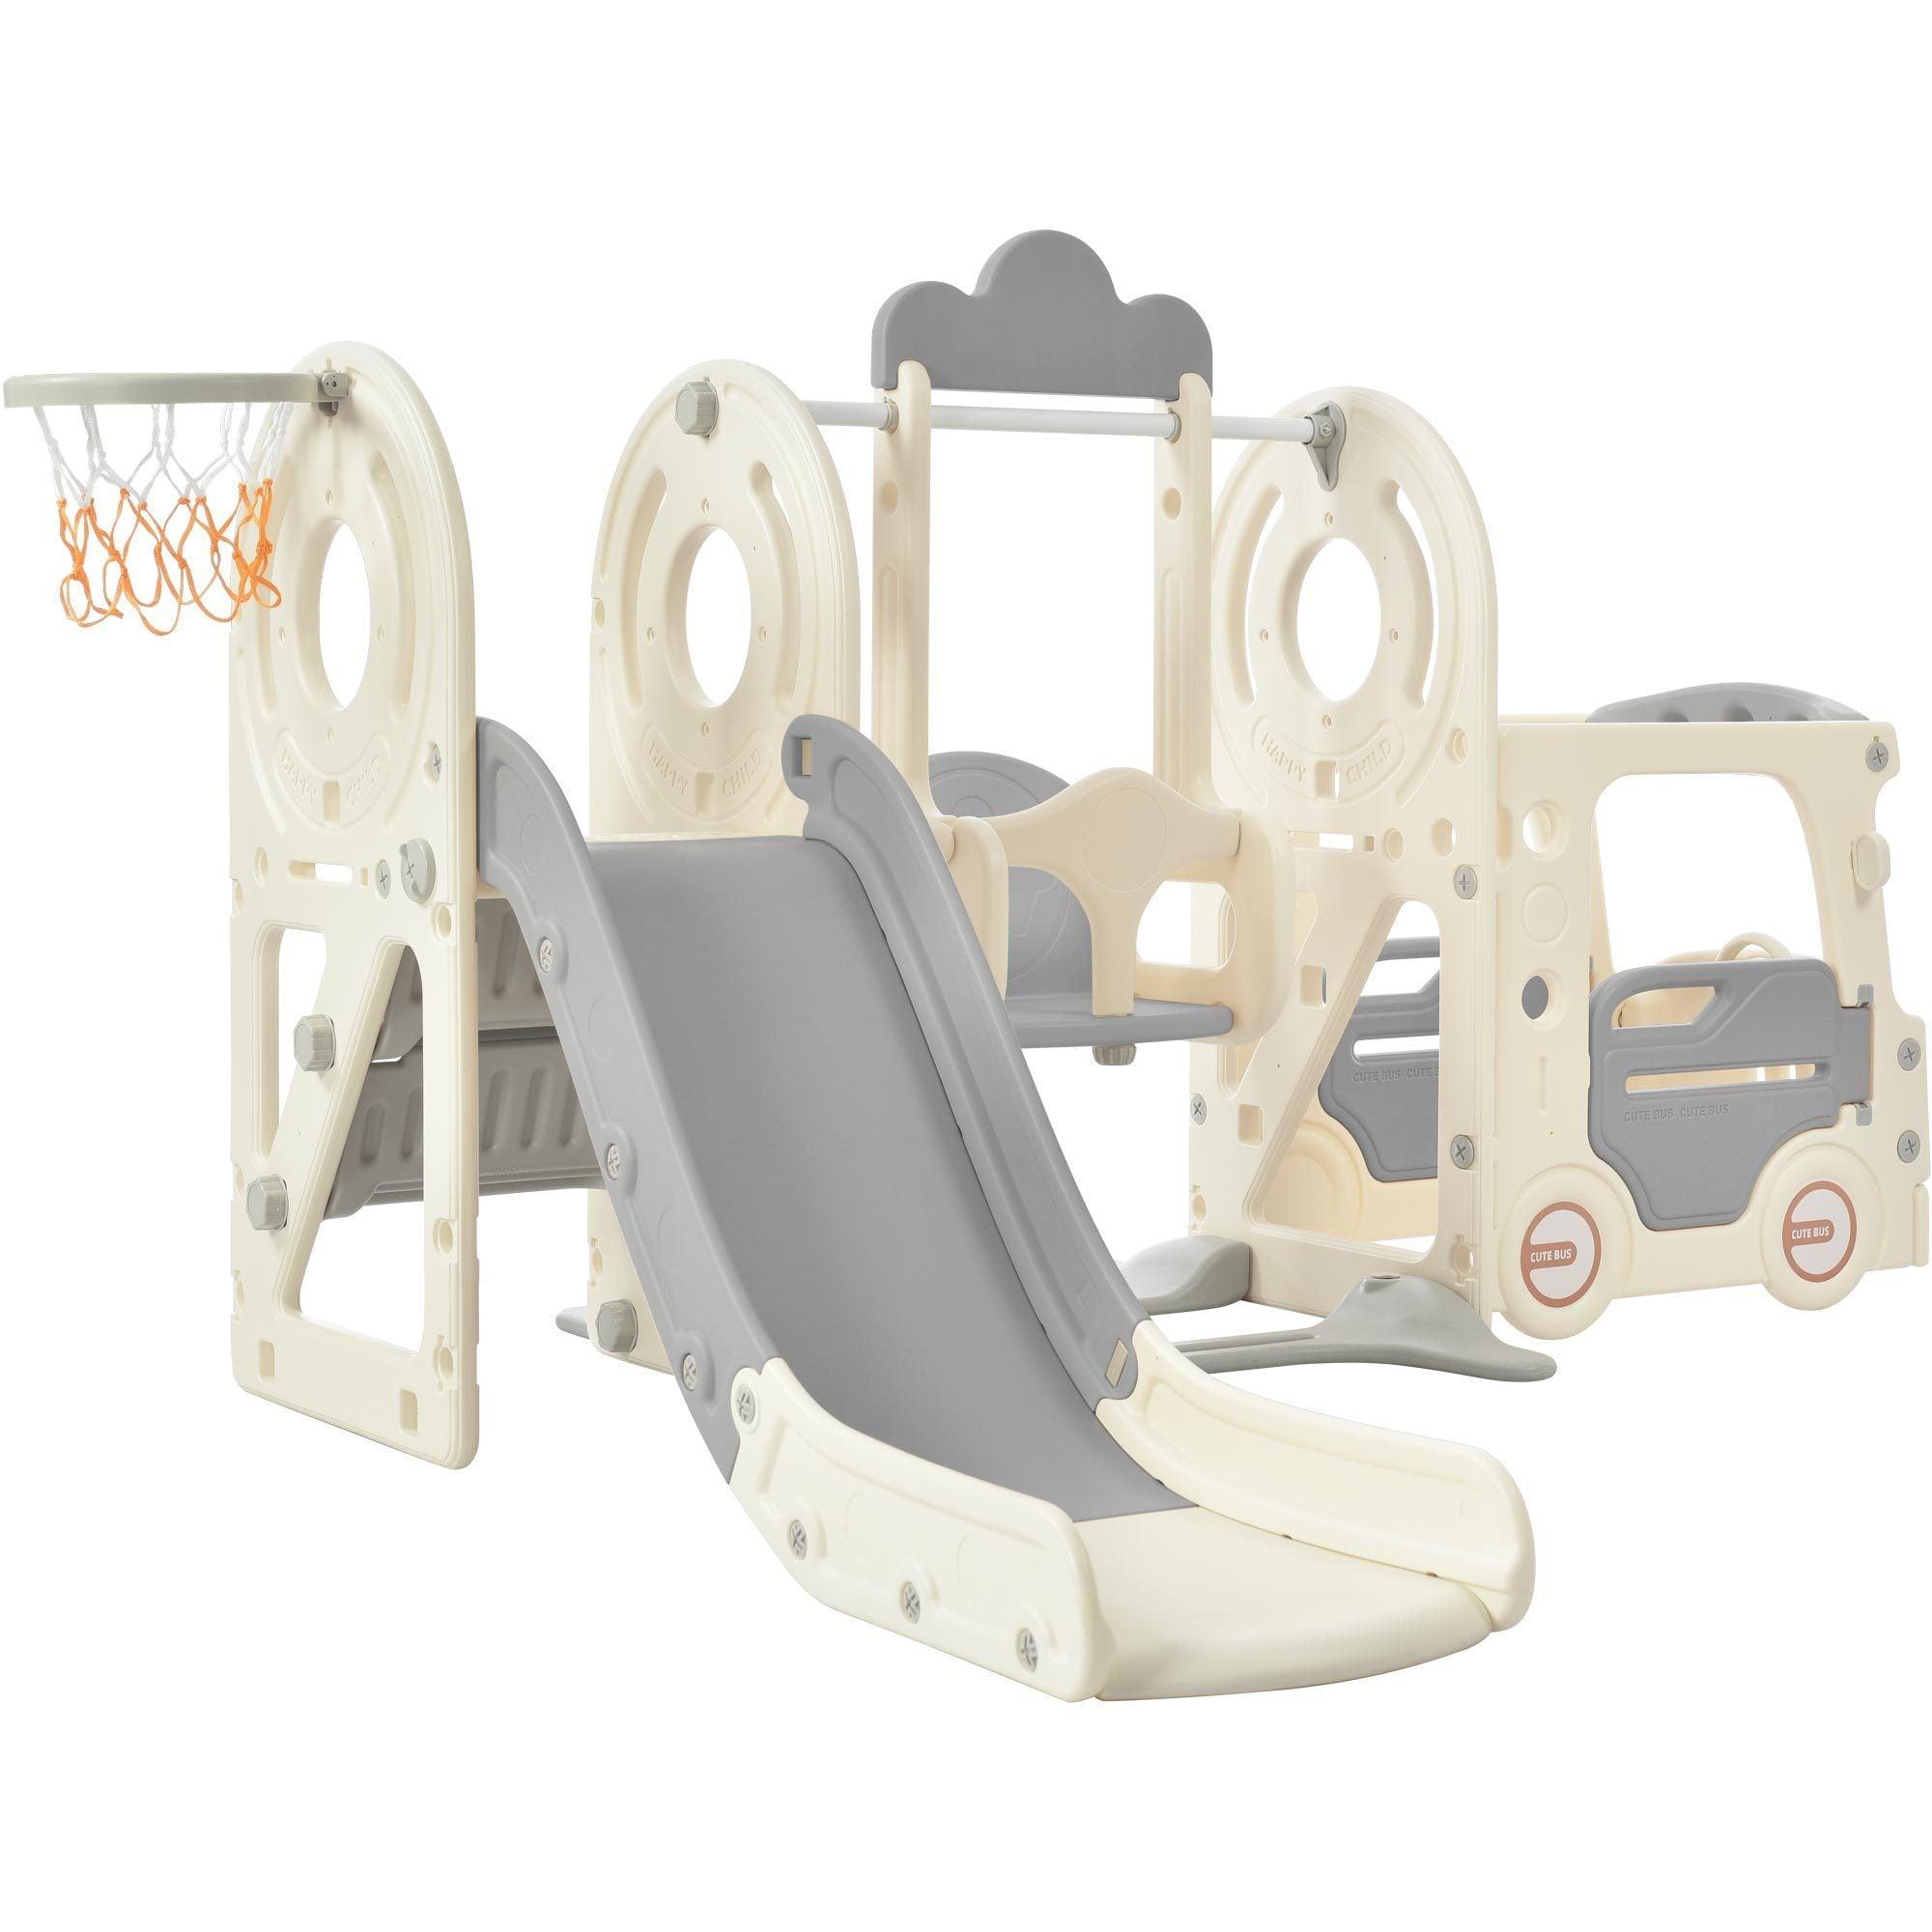 🆓🚛 Kids Swing-N-Slide With Bus Play Structure, Freestanding Bus Toy With Slide&Swing for Toddlers, Bus Slide Set With Basketball Hoop, White & Gray